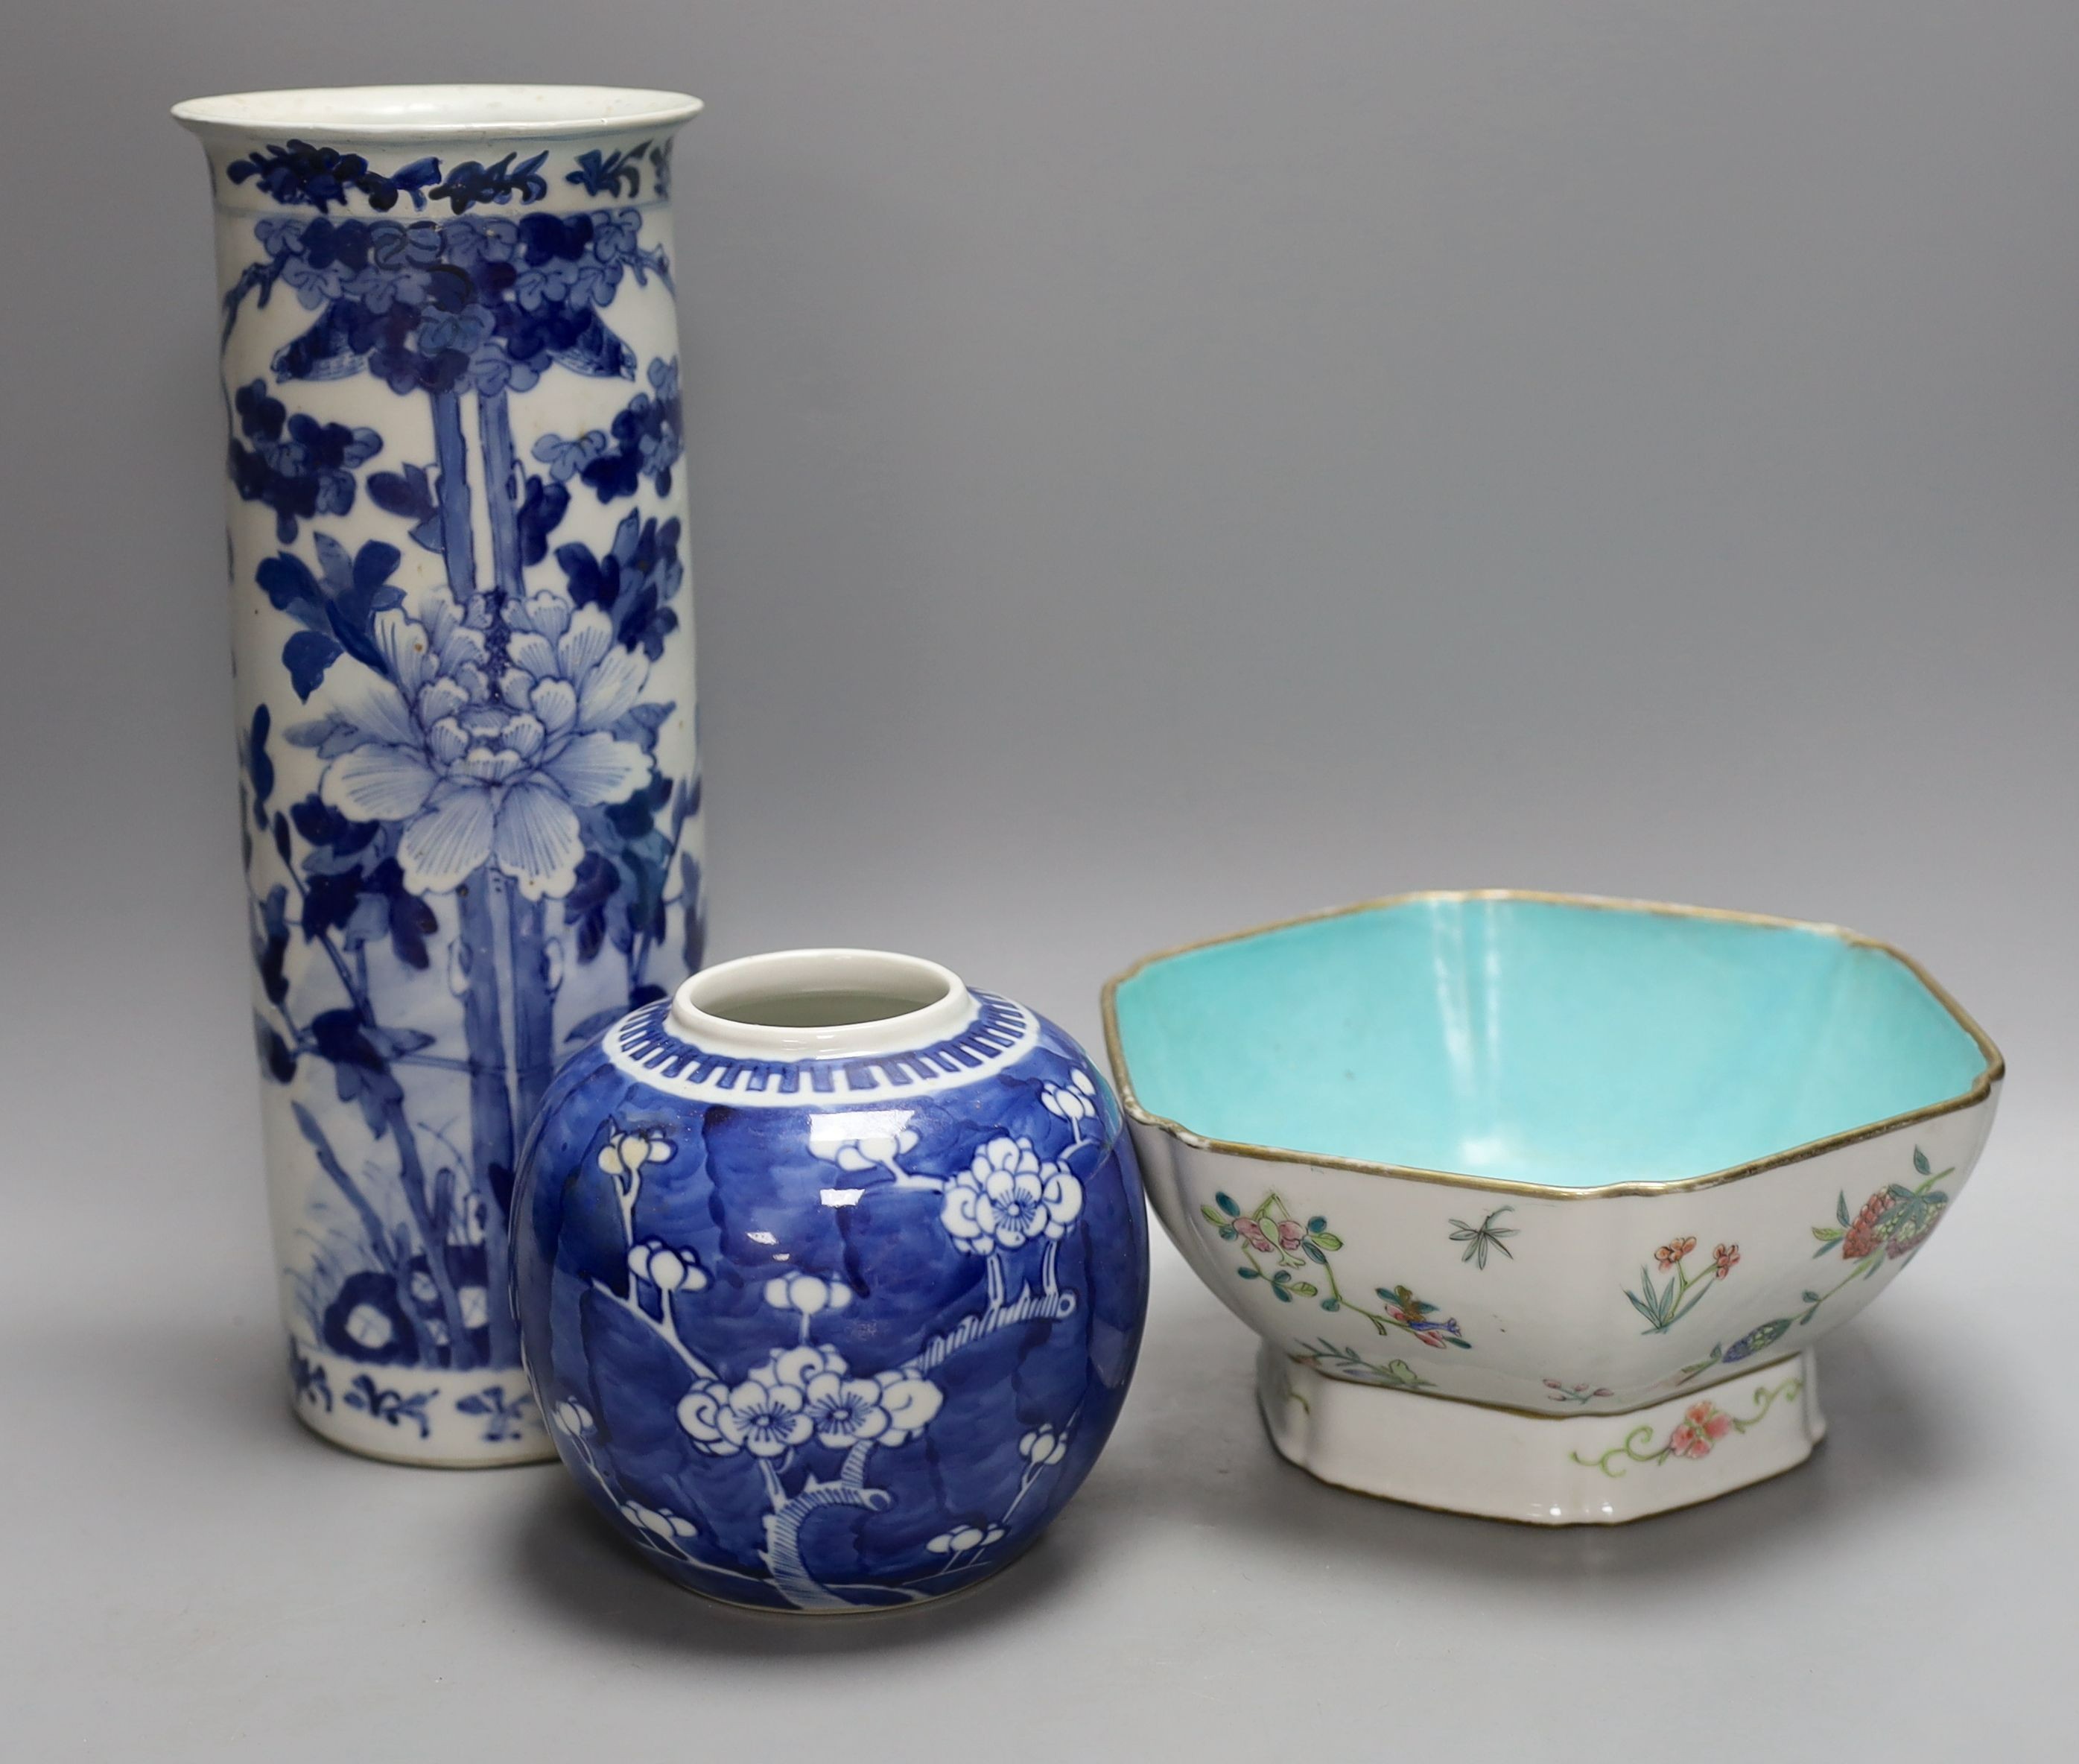 19th century Chinese ceramics, to include a jar, vase and hexagonal famille rose bowl - tallest 29.5cm